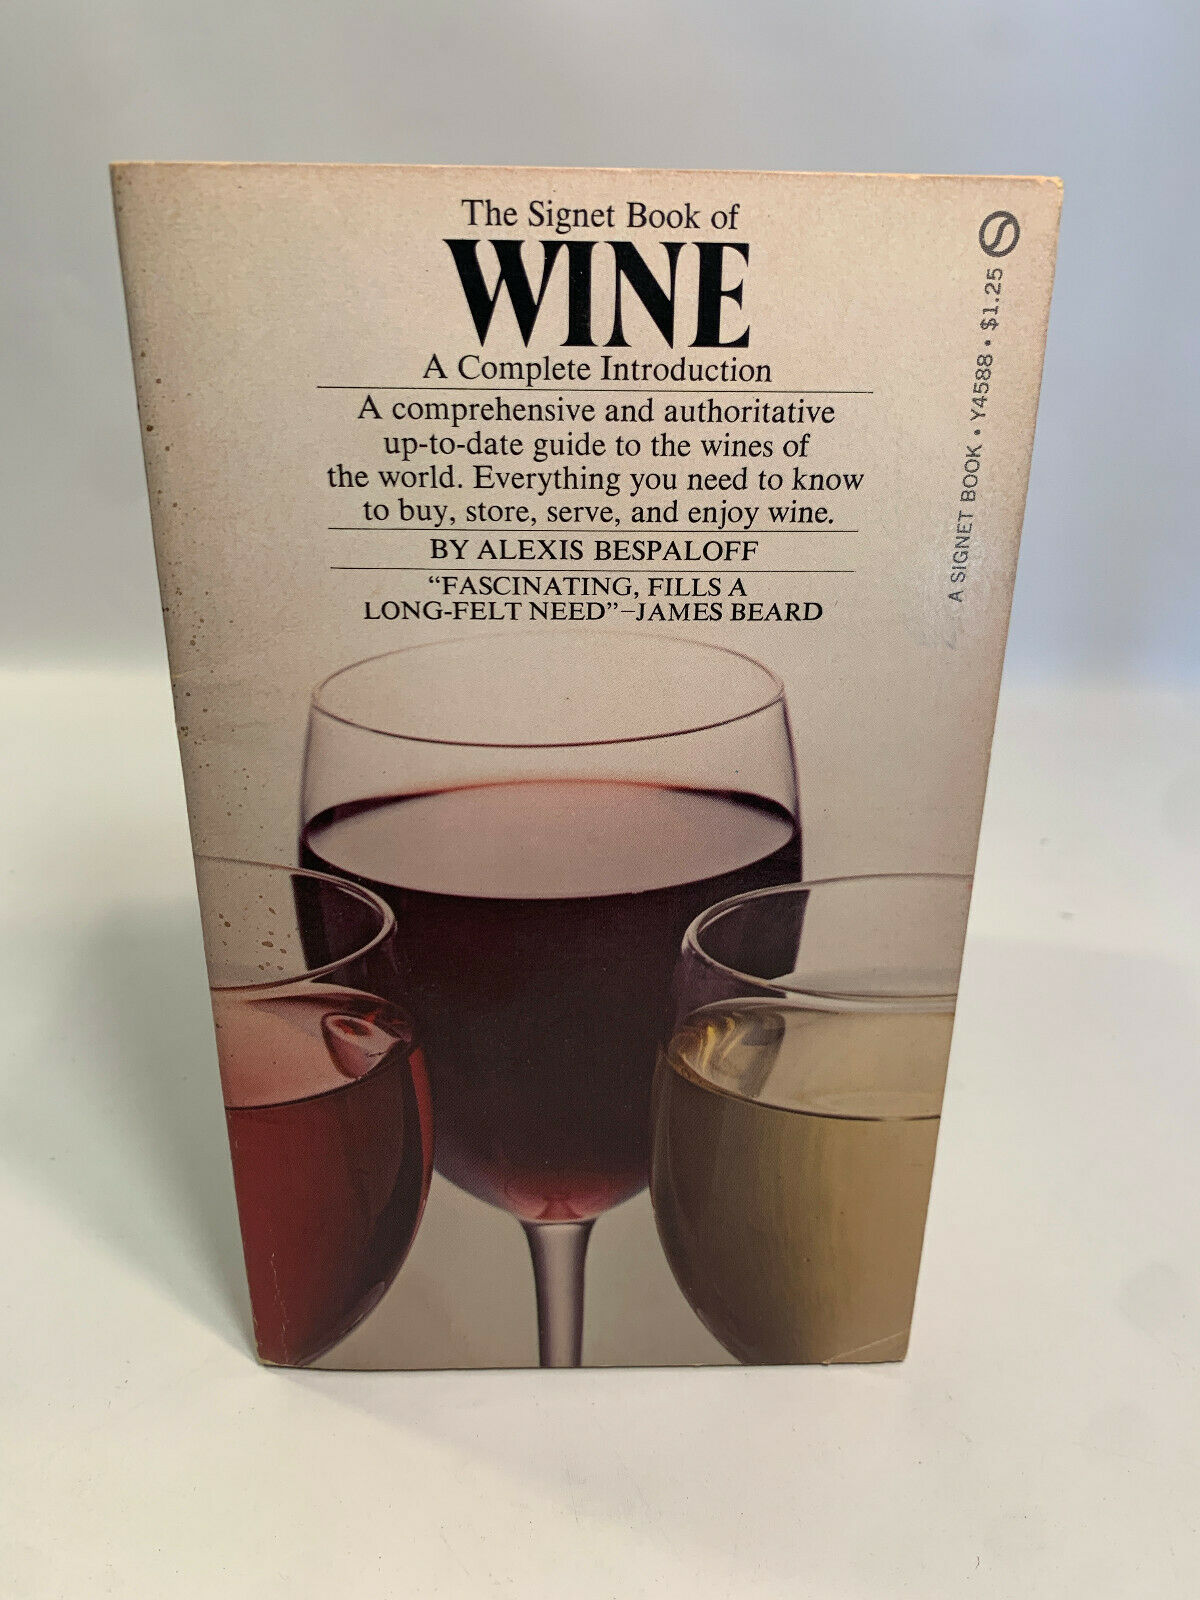 The Signet Book of Wine: by Alexis Bespaloff (A1)